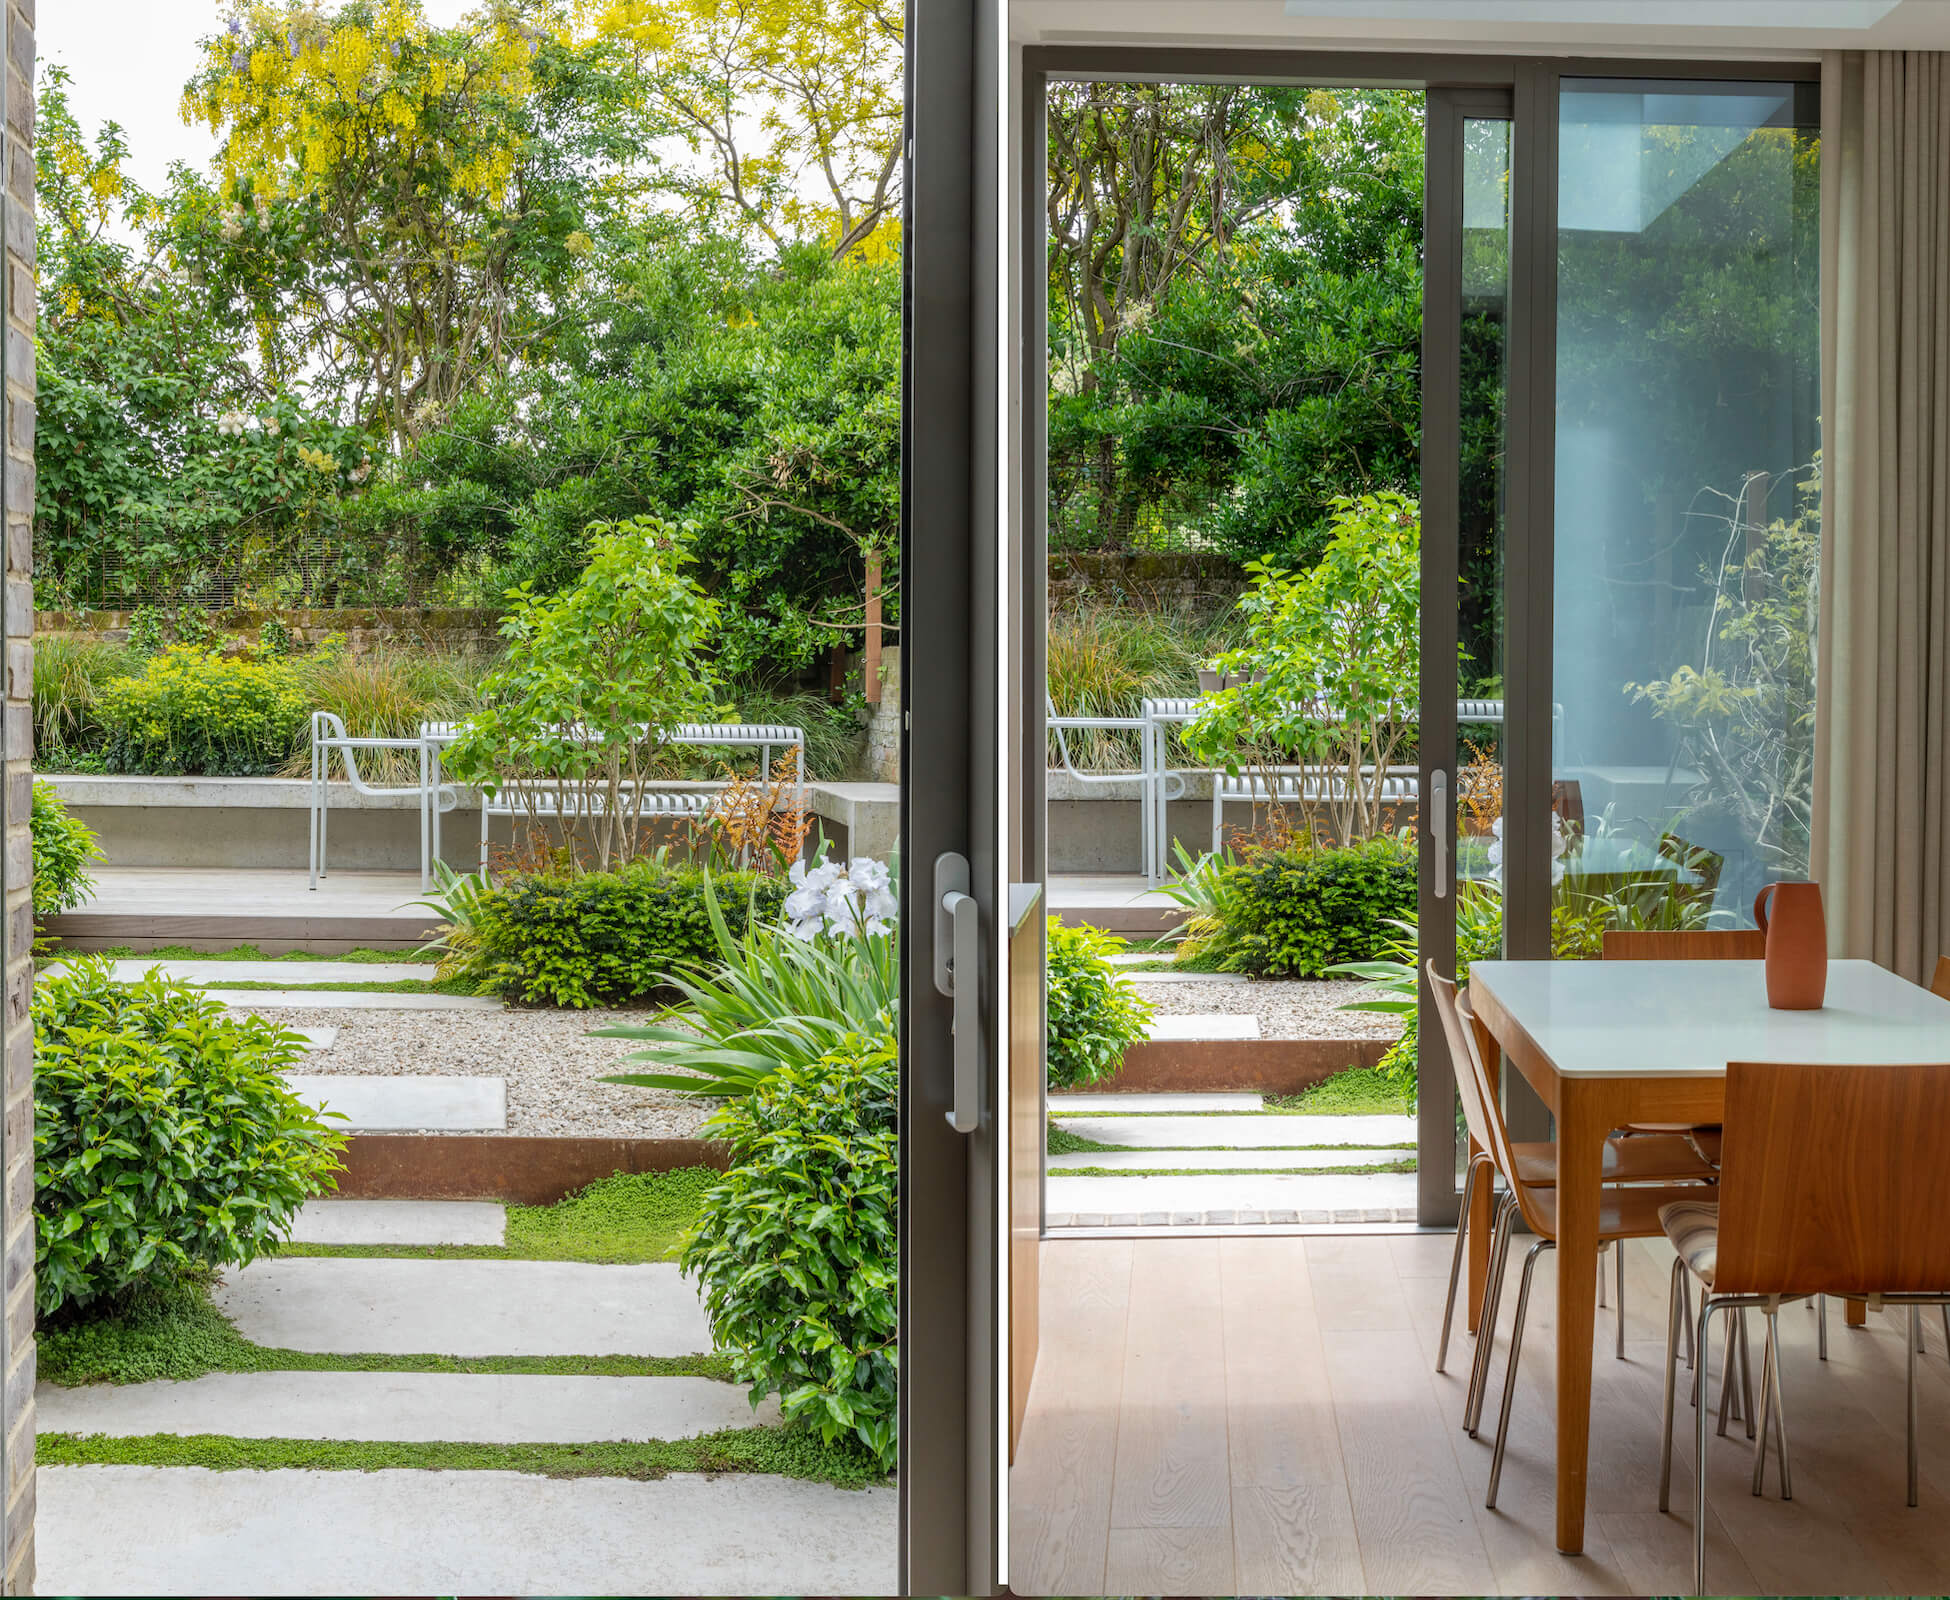 The simple tones and textures in the garden blend harmoniously with the interior materials.